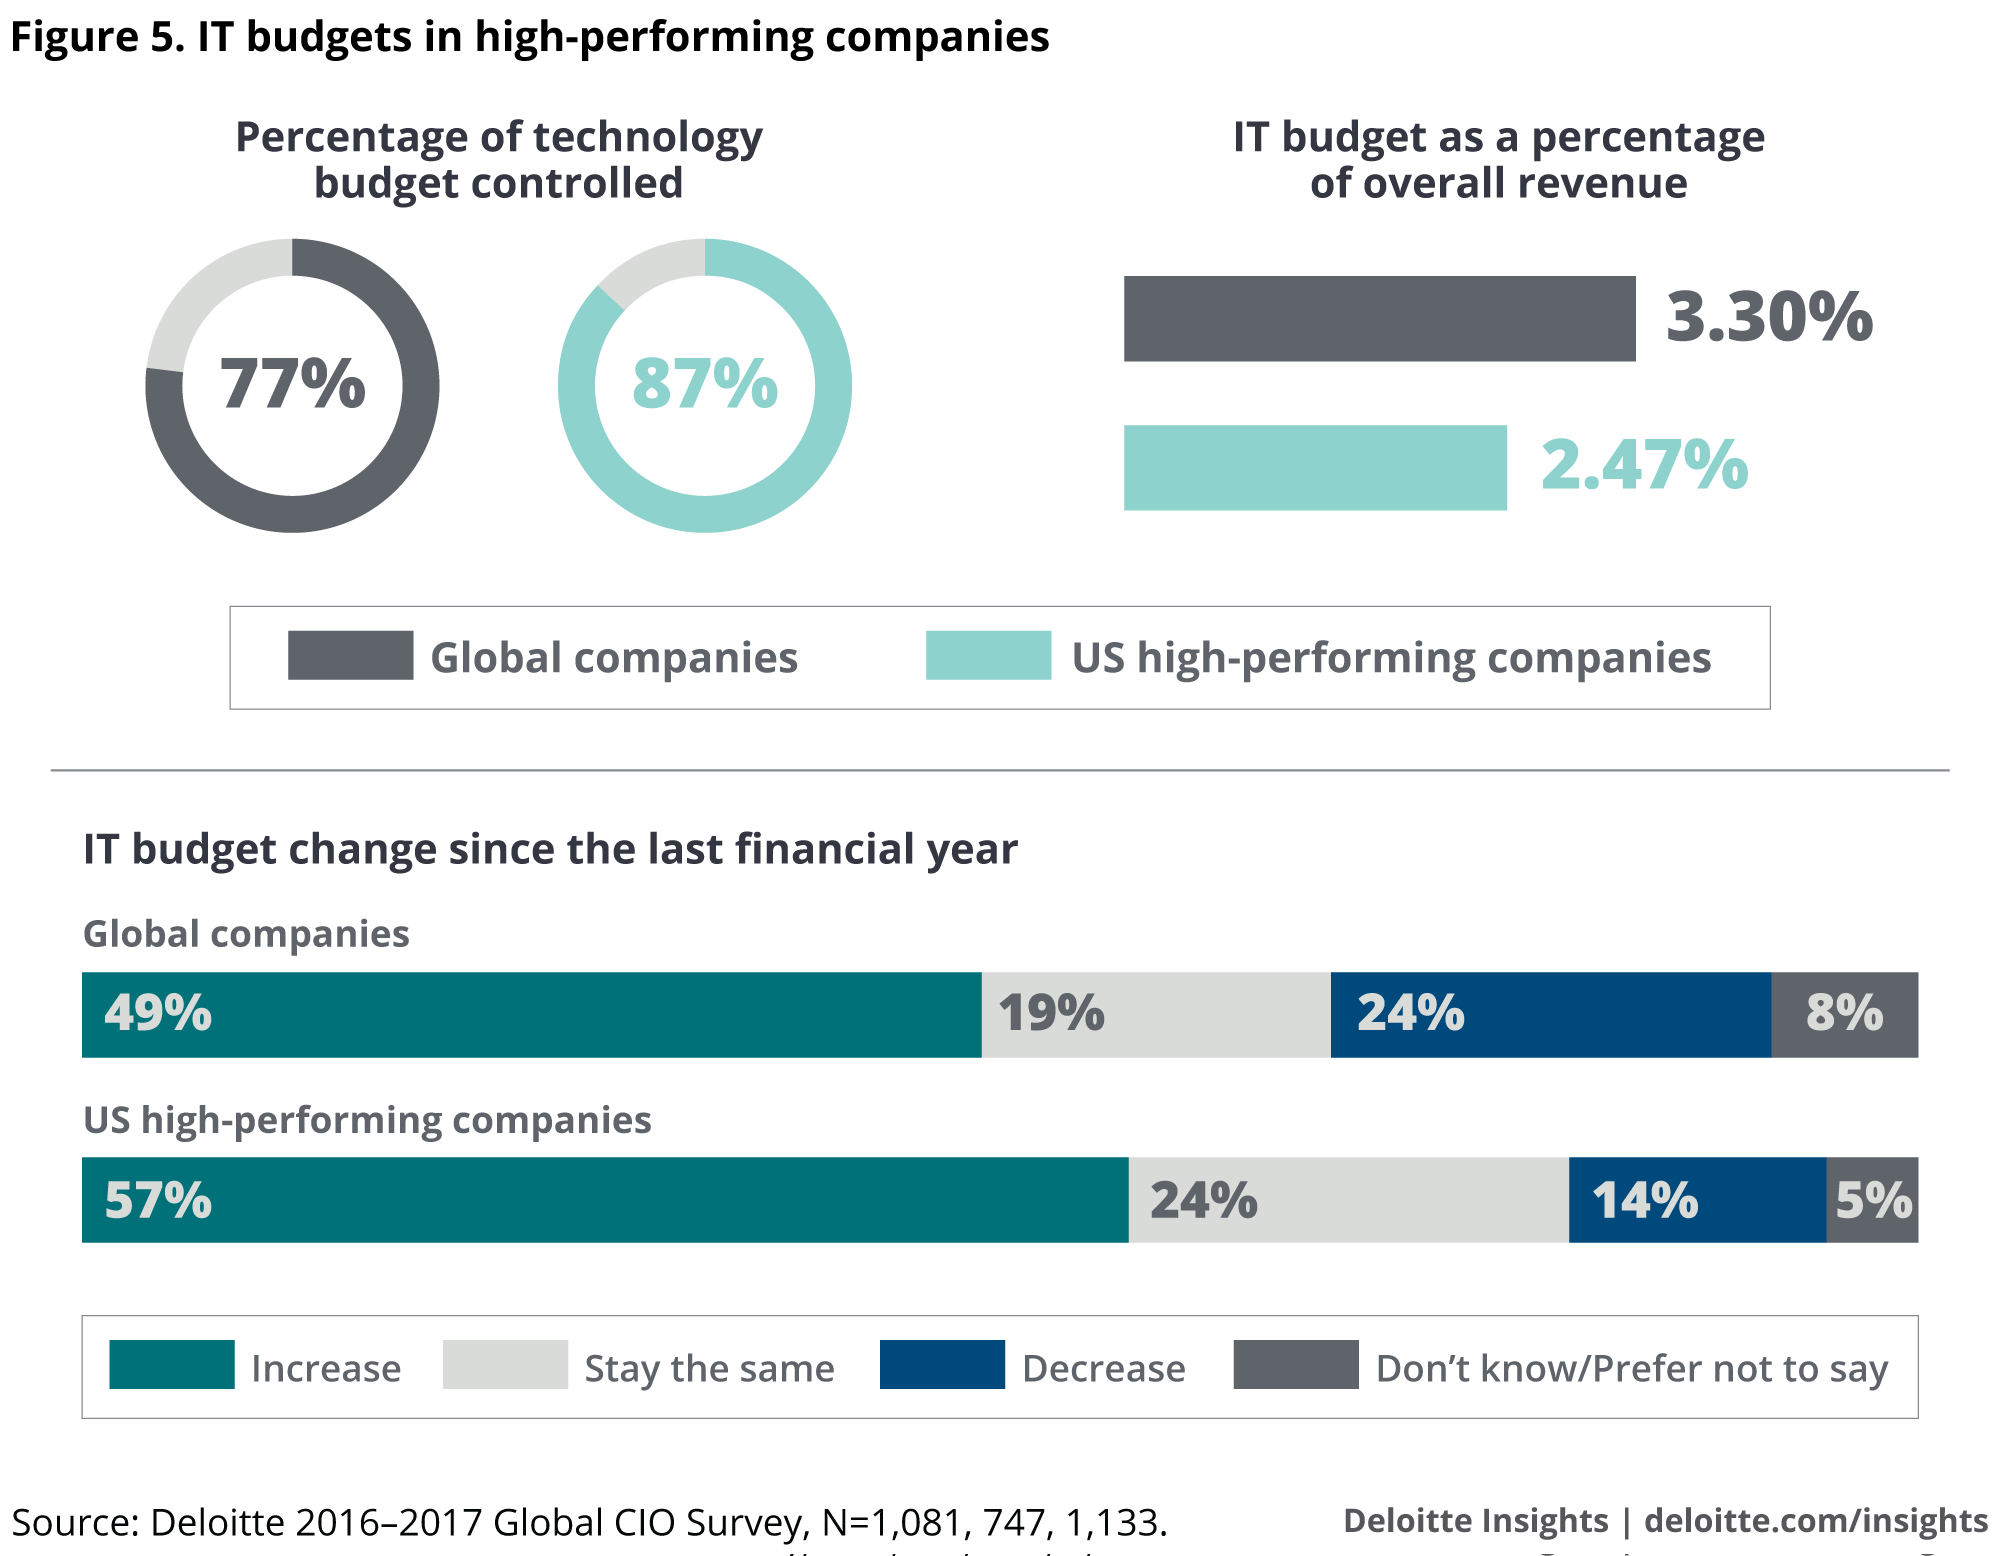 IT budgets in high-performing companies